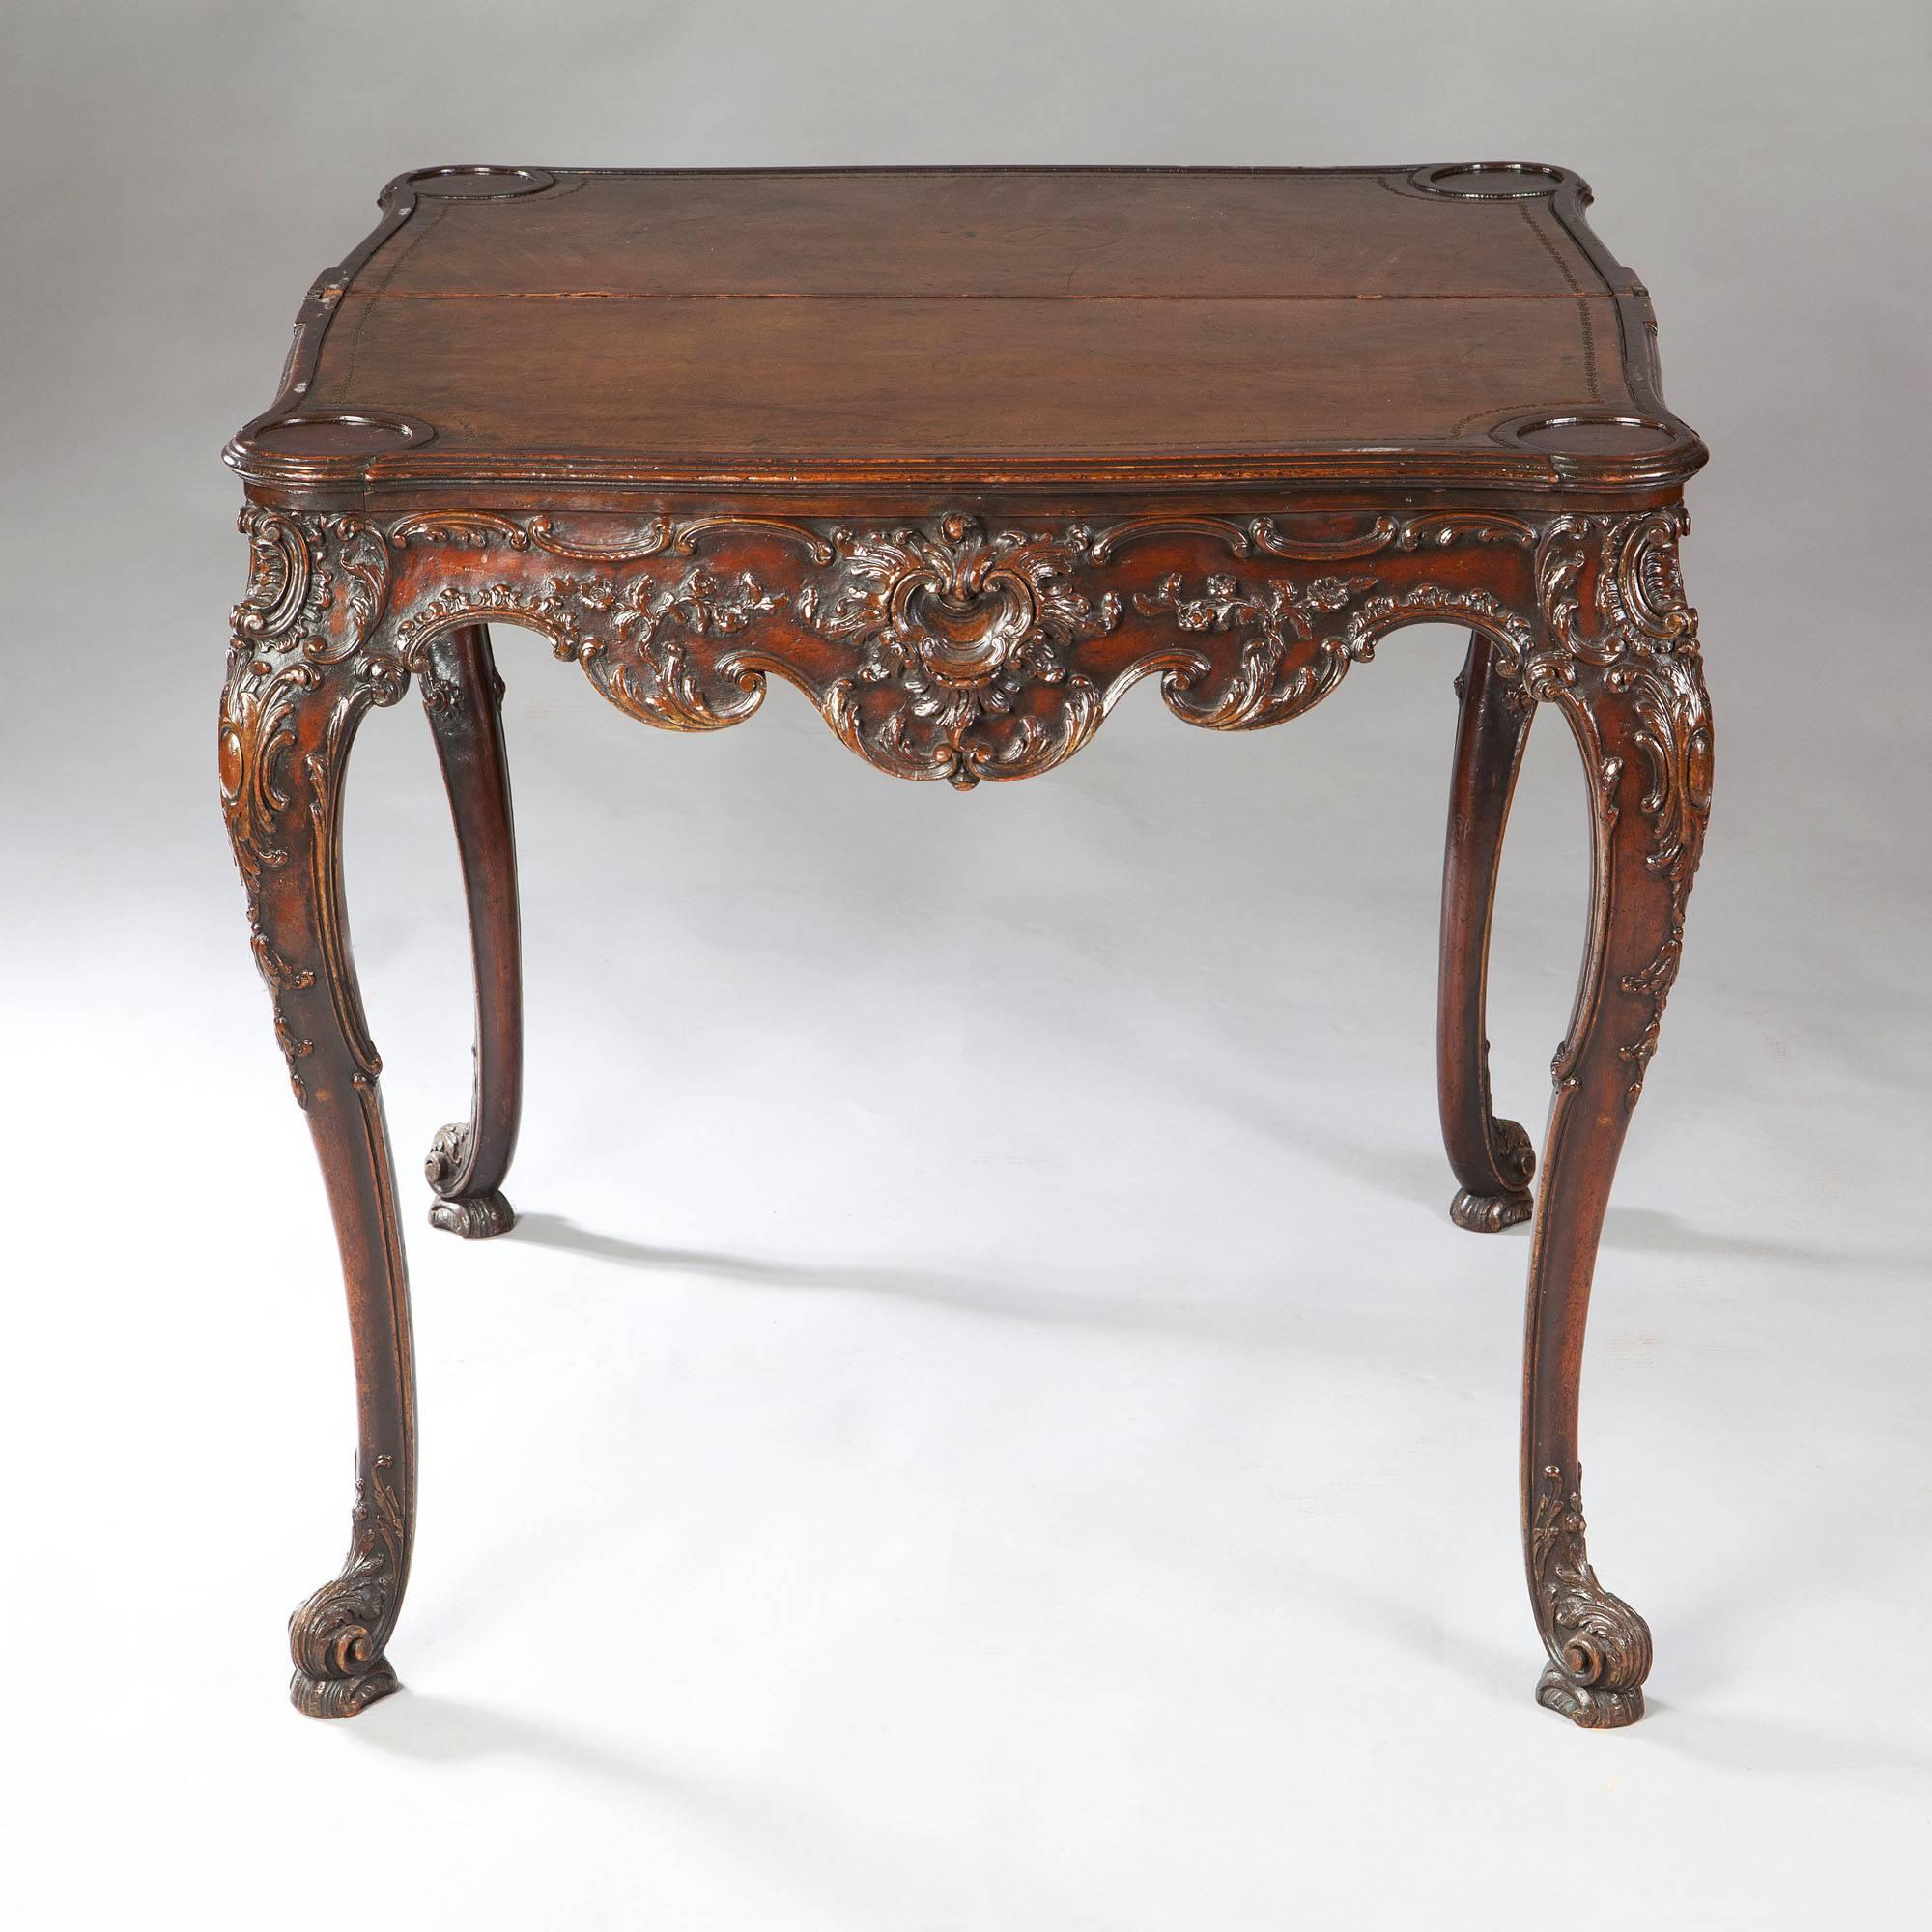 England, 19th century.

A fine rococo card table, the scalloped shaped front richly carved with rococo ornament, the flip top supported on extending rear legs and opening to a leather playing surface with four counter wells. The whole raised on